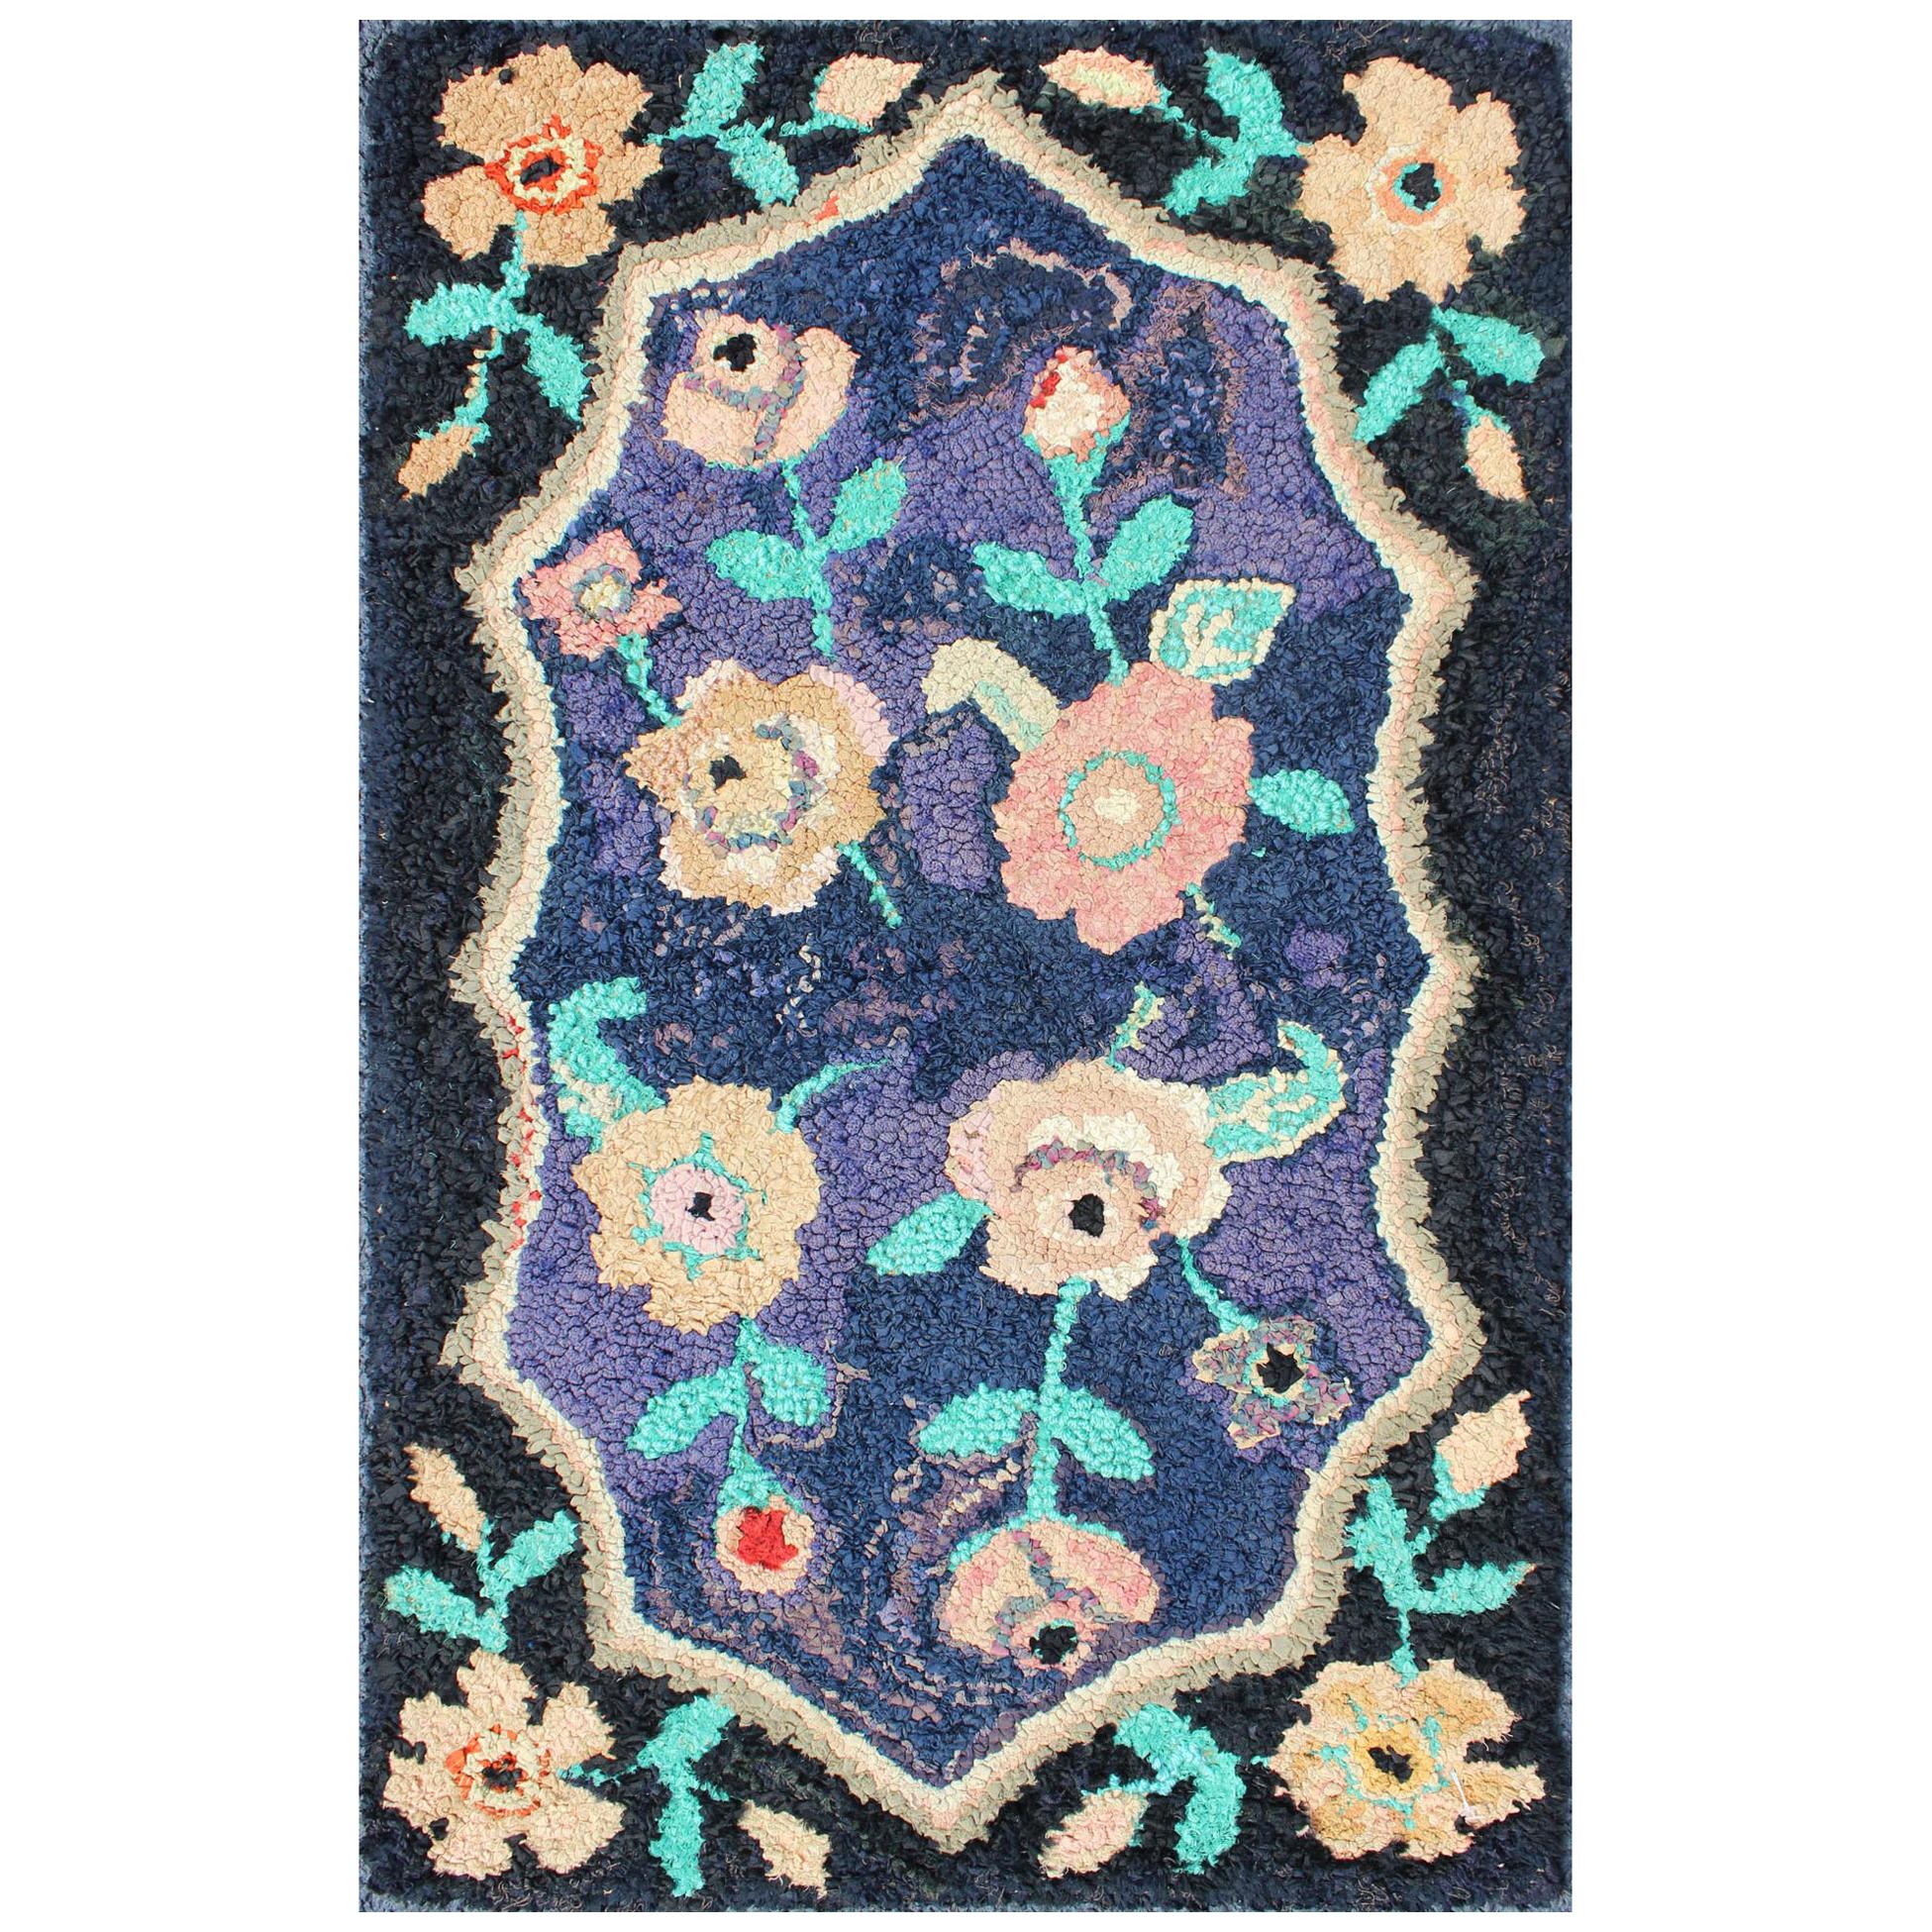 American Hooked Rug in Floral Pattern with Medallion on Purple/Blue, Black